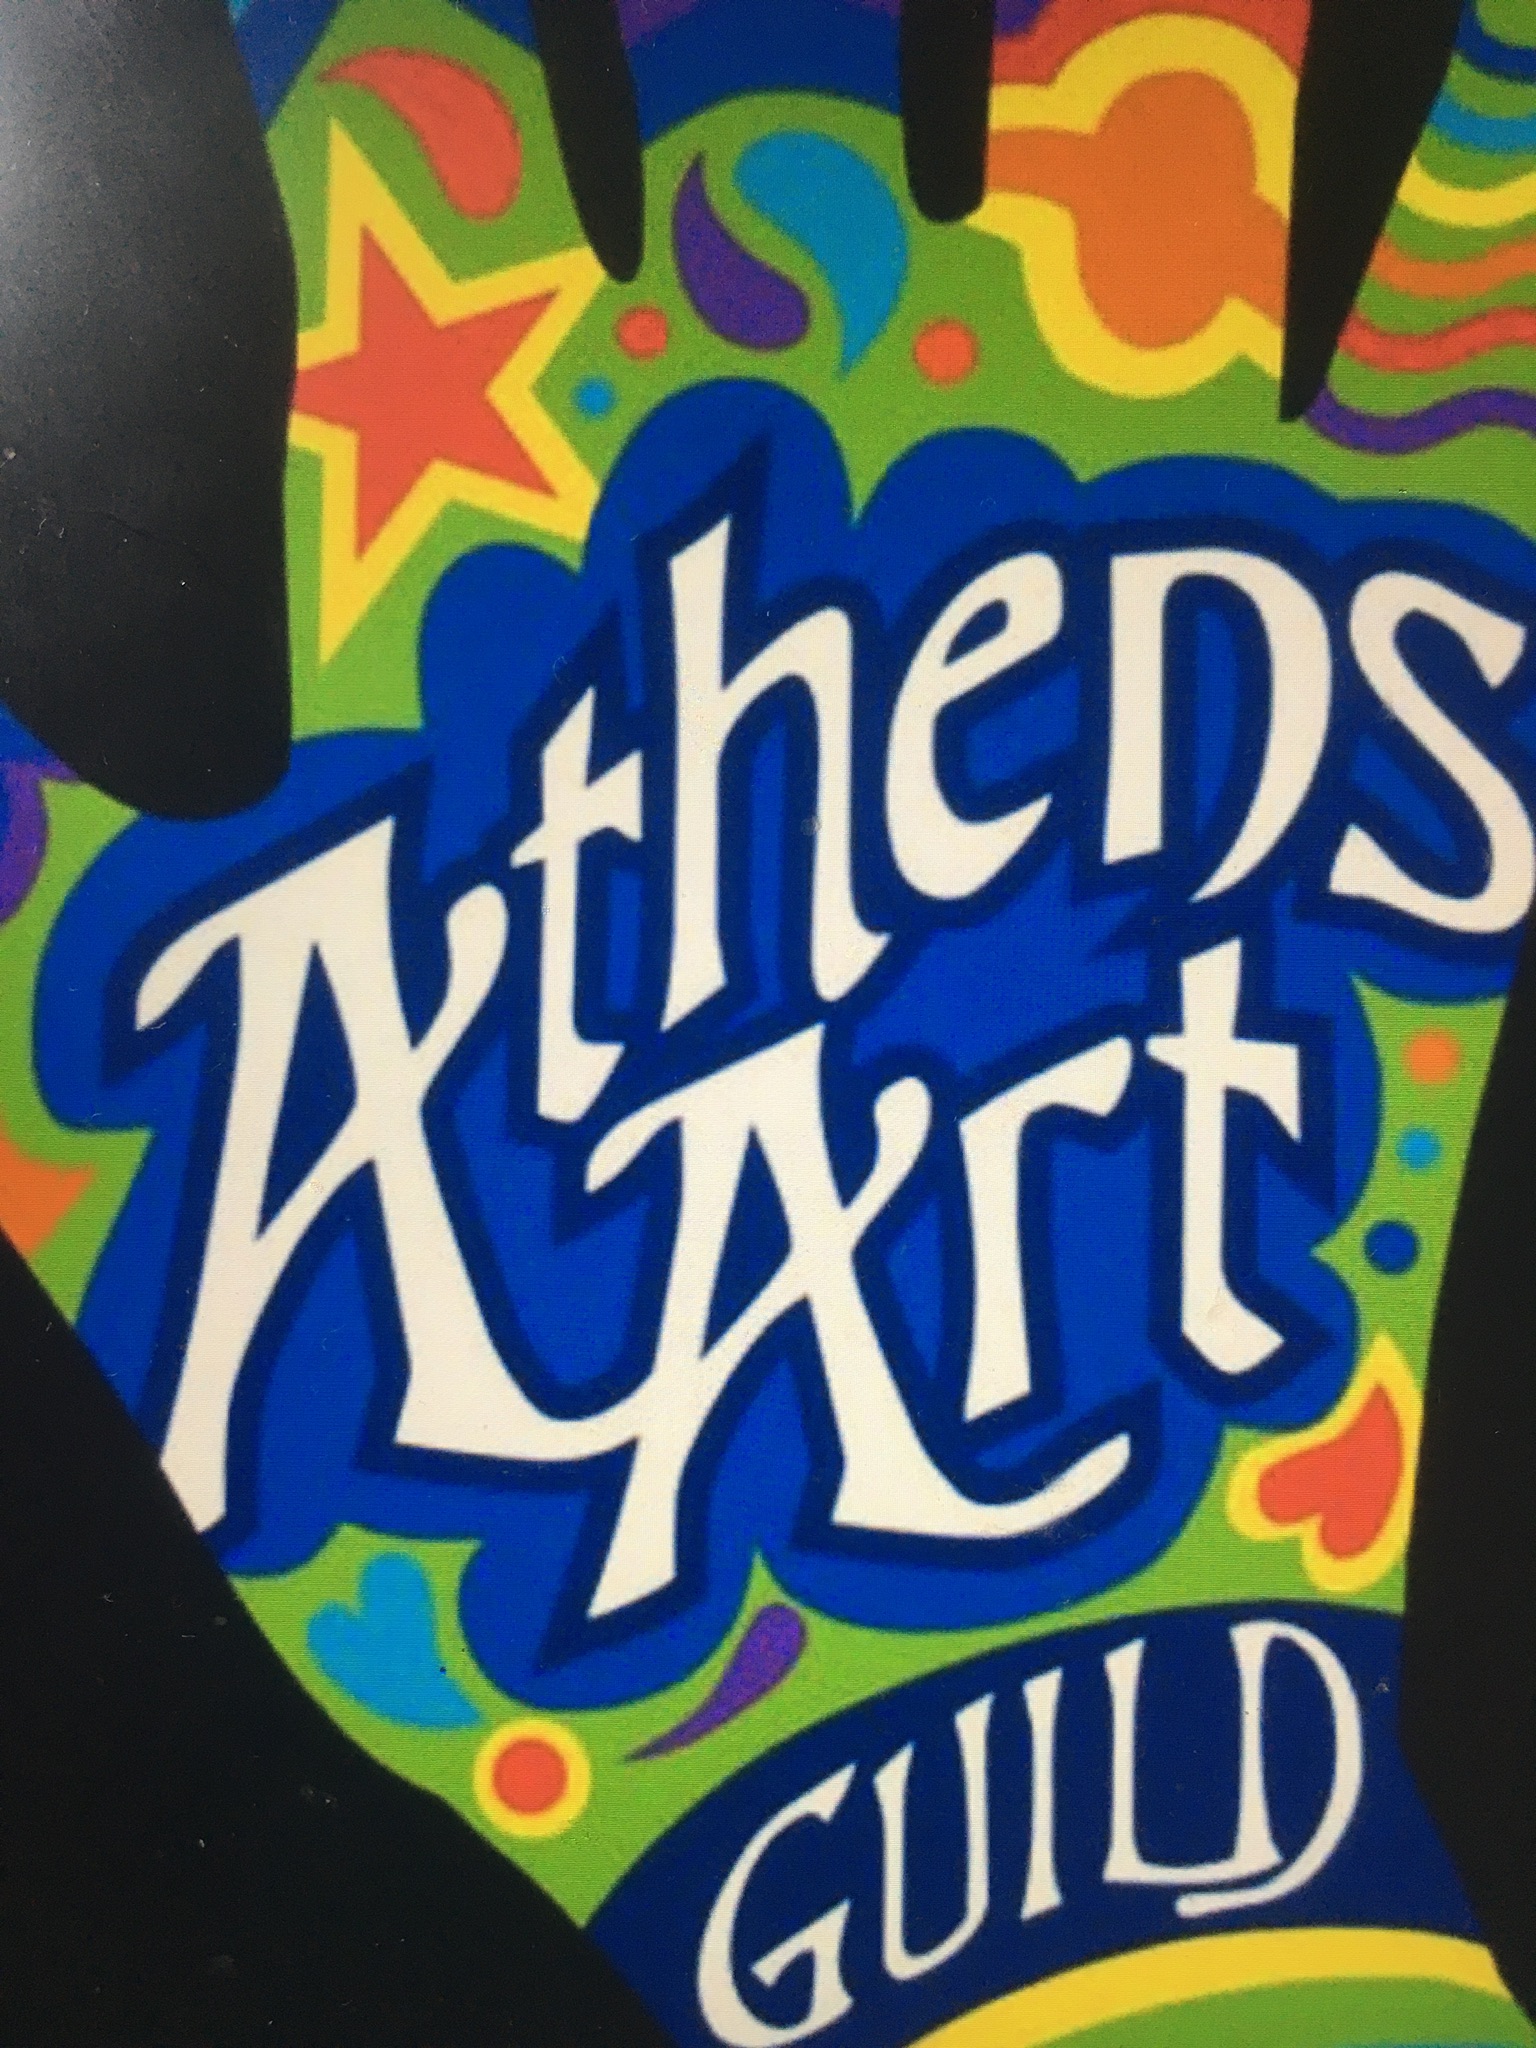 The logo for the Athens Art Guild, white text layered on a colorful graphic of a hand.